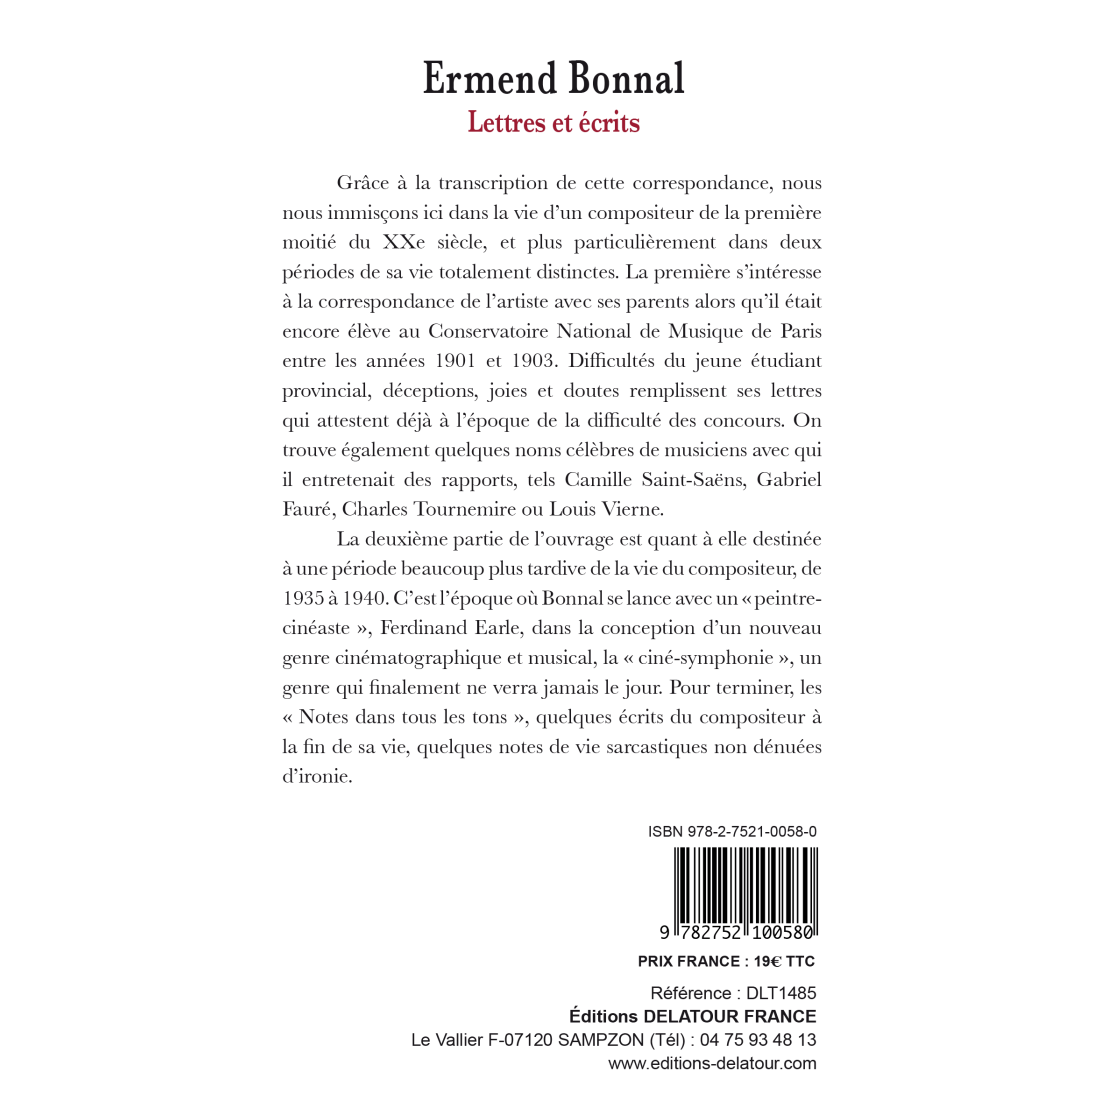 Ermend Bonnal, Letters and writings